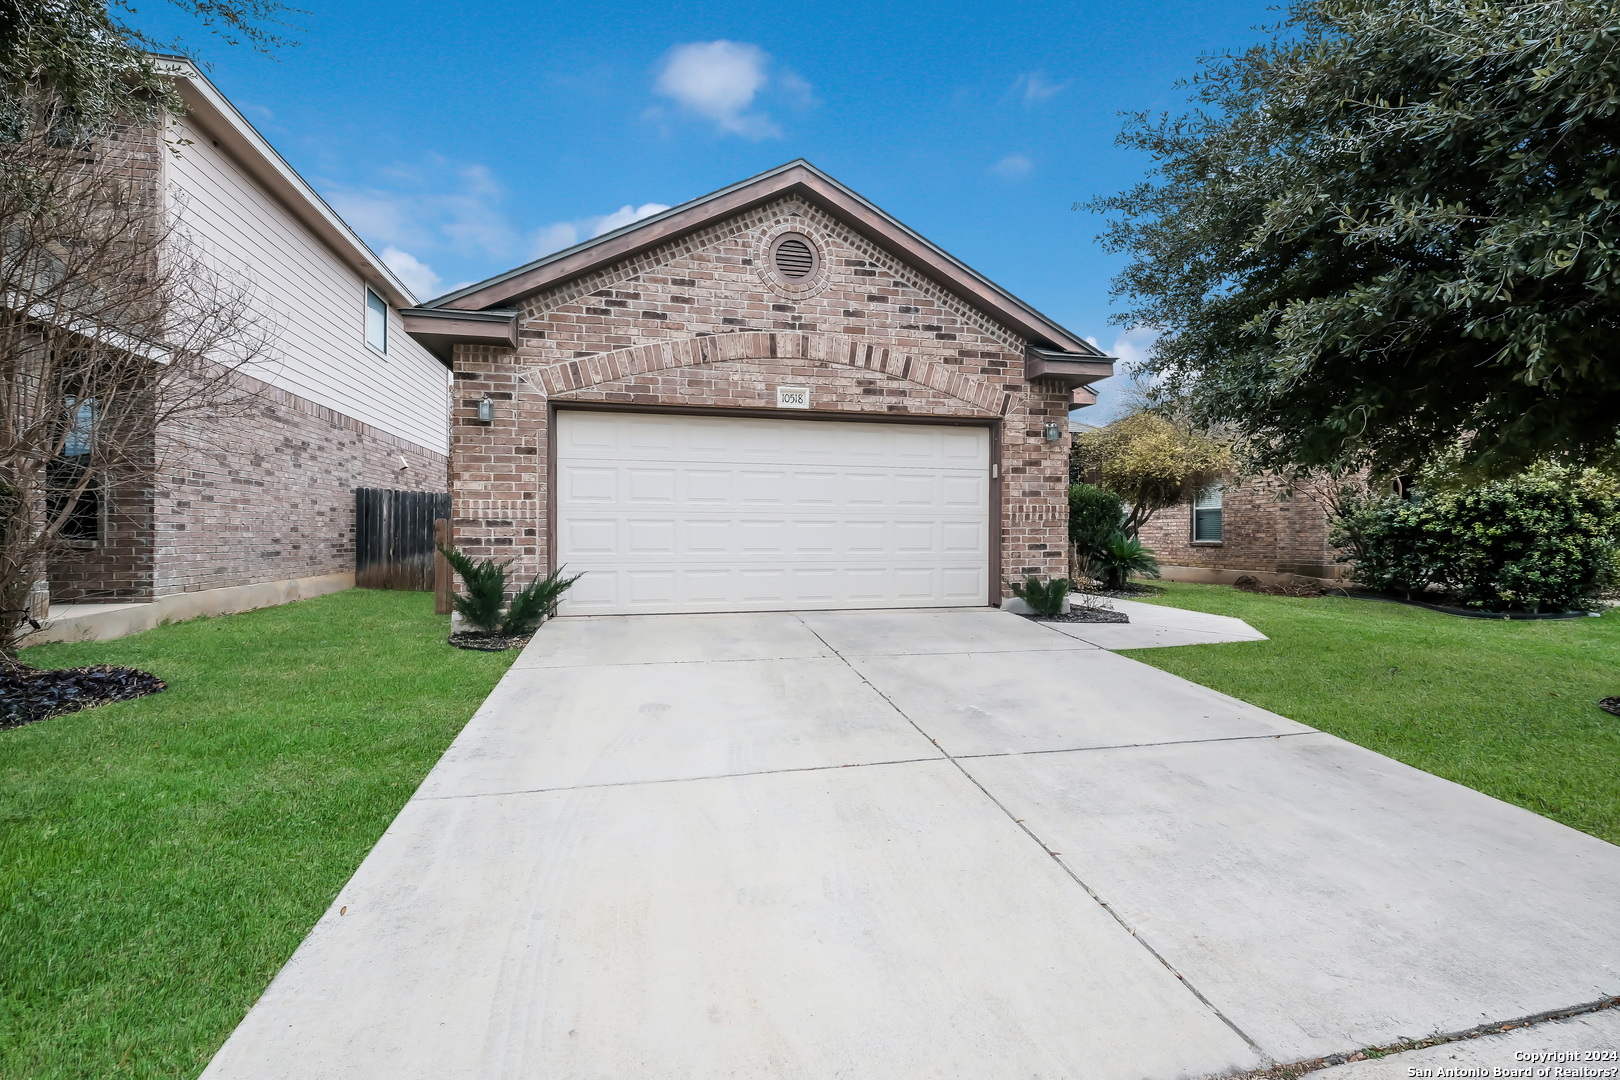 Photo of 10518 Corvey Ln in Helotes, TX